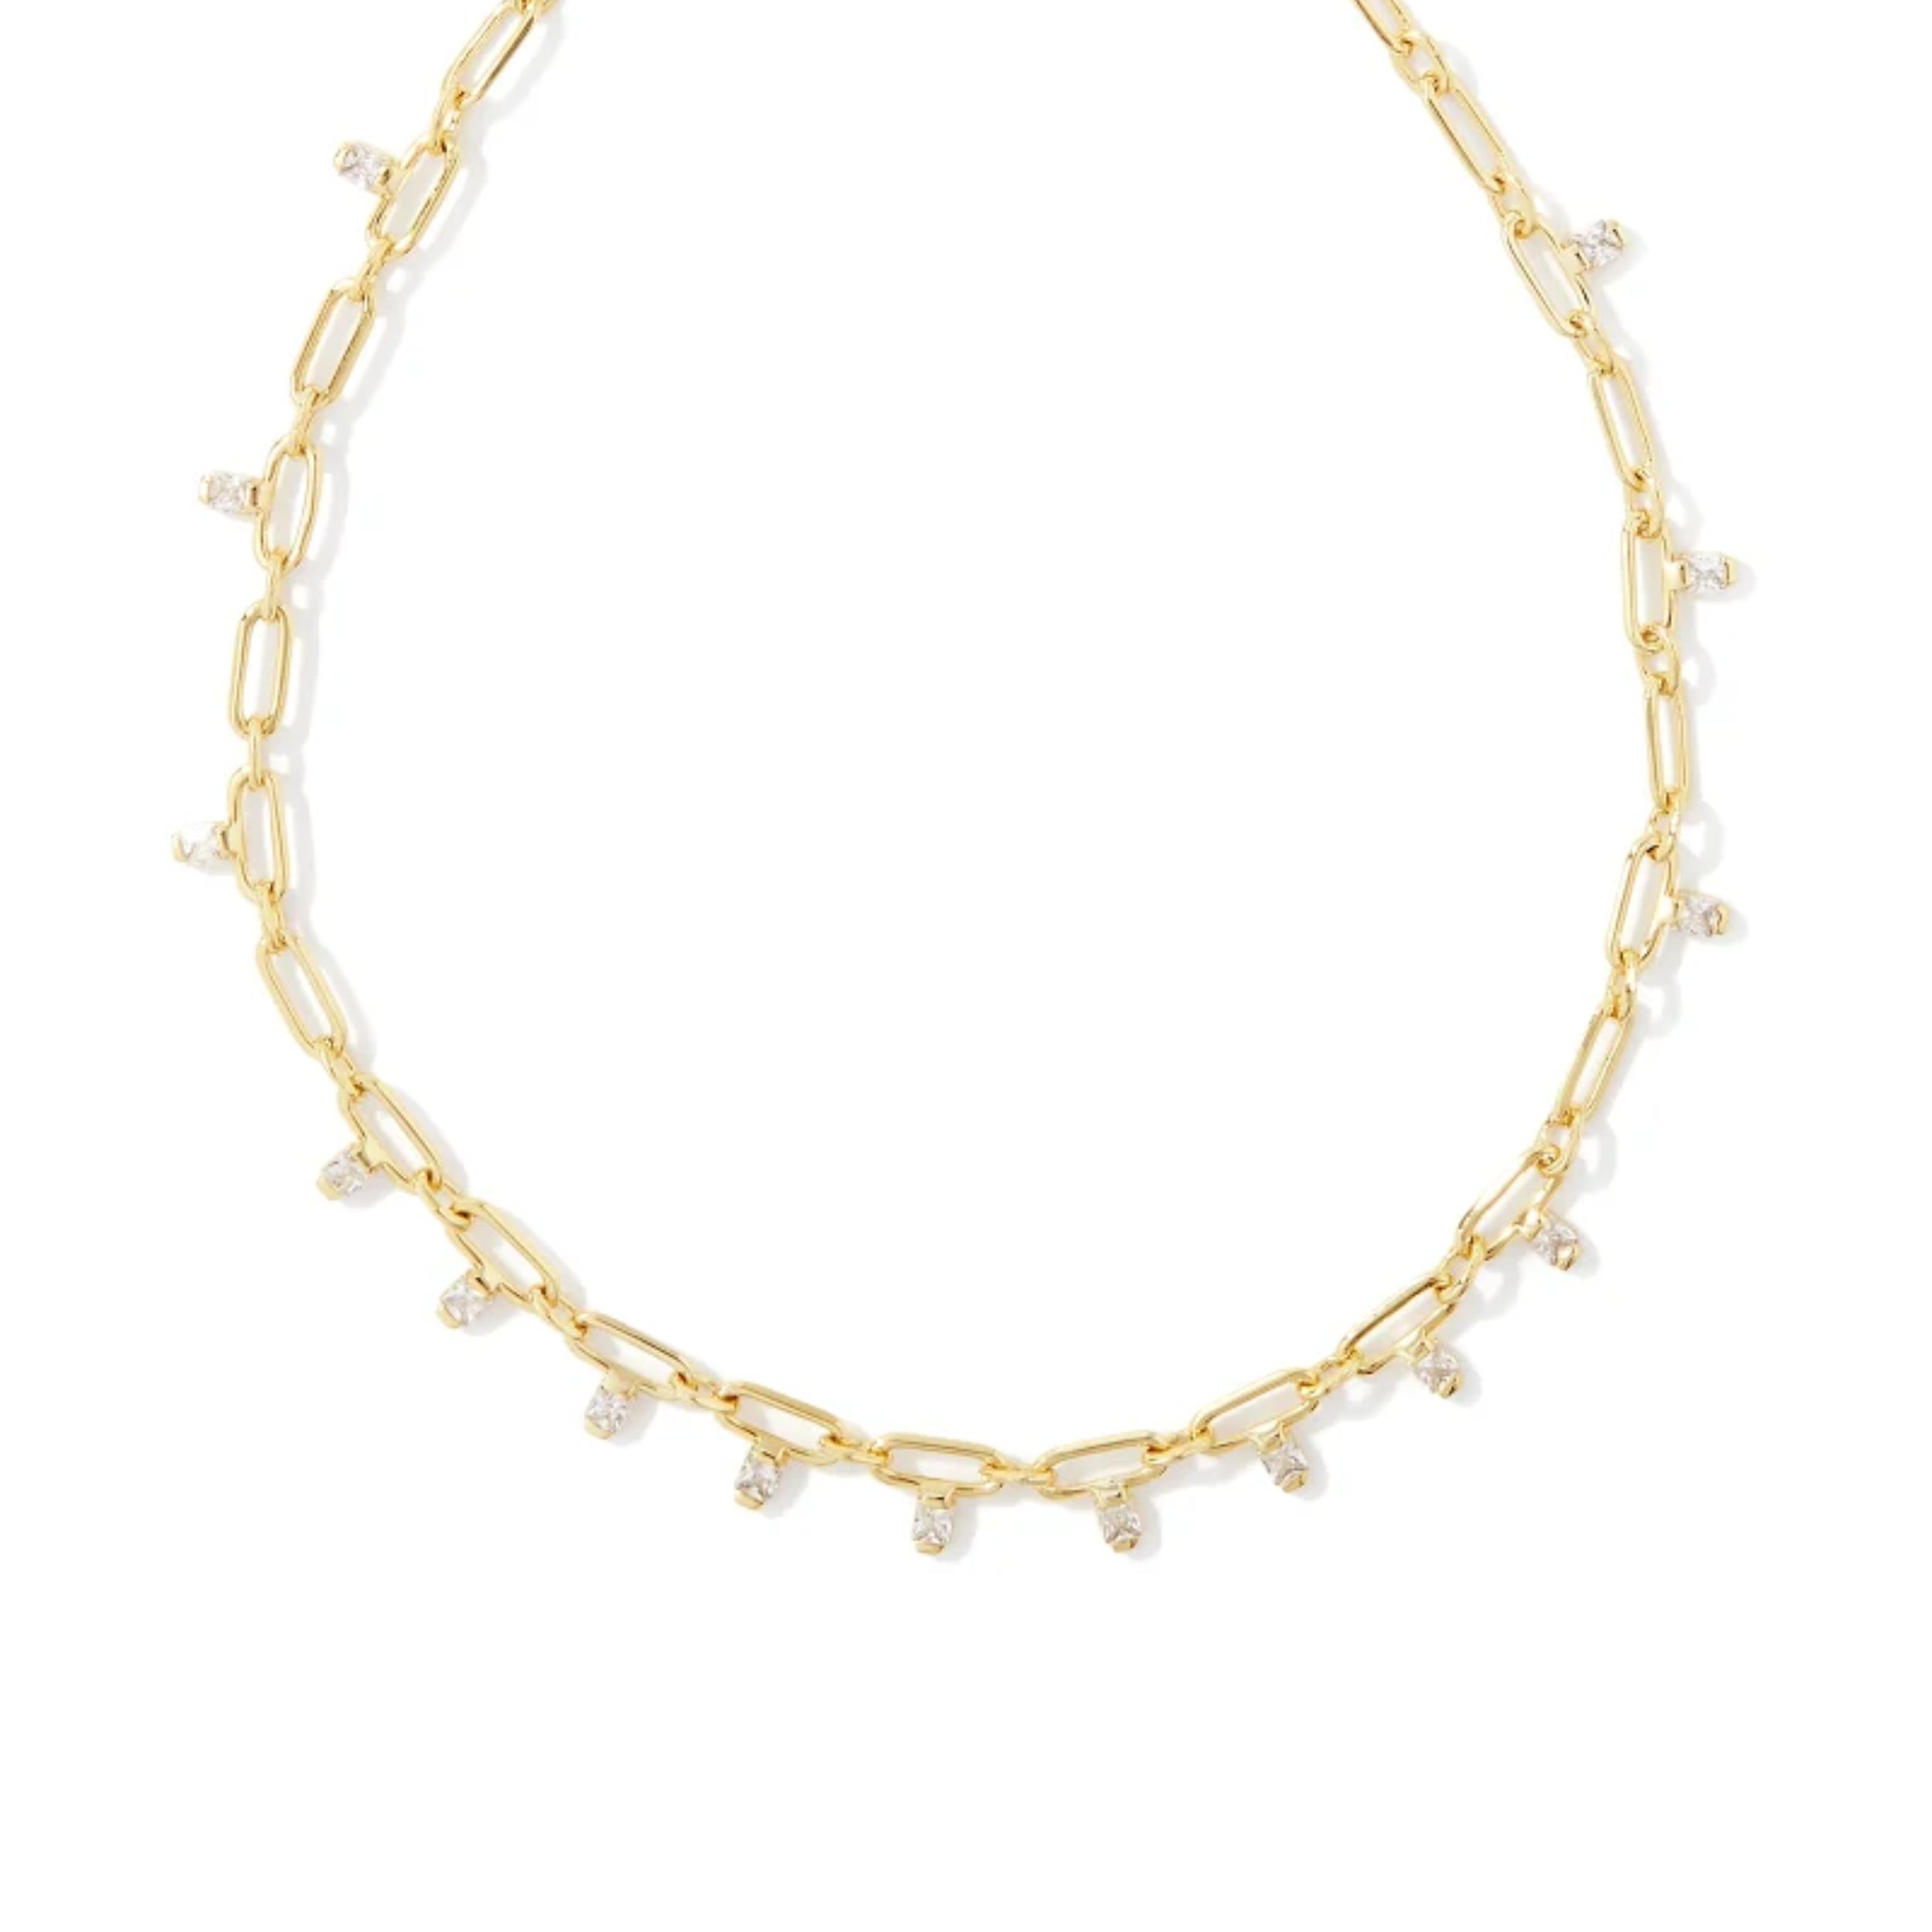 This Lindy Gold Crystal Chain Necklace by Kendra Scott is pictured on a white background.